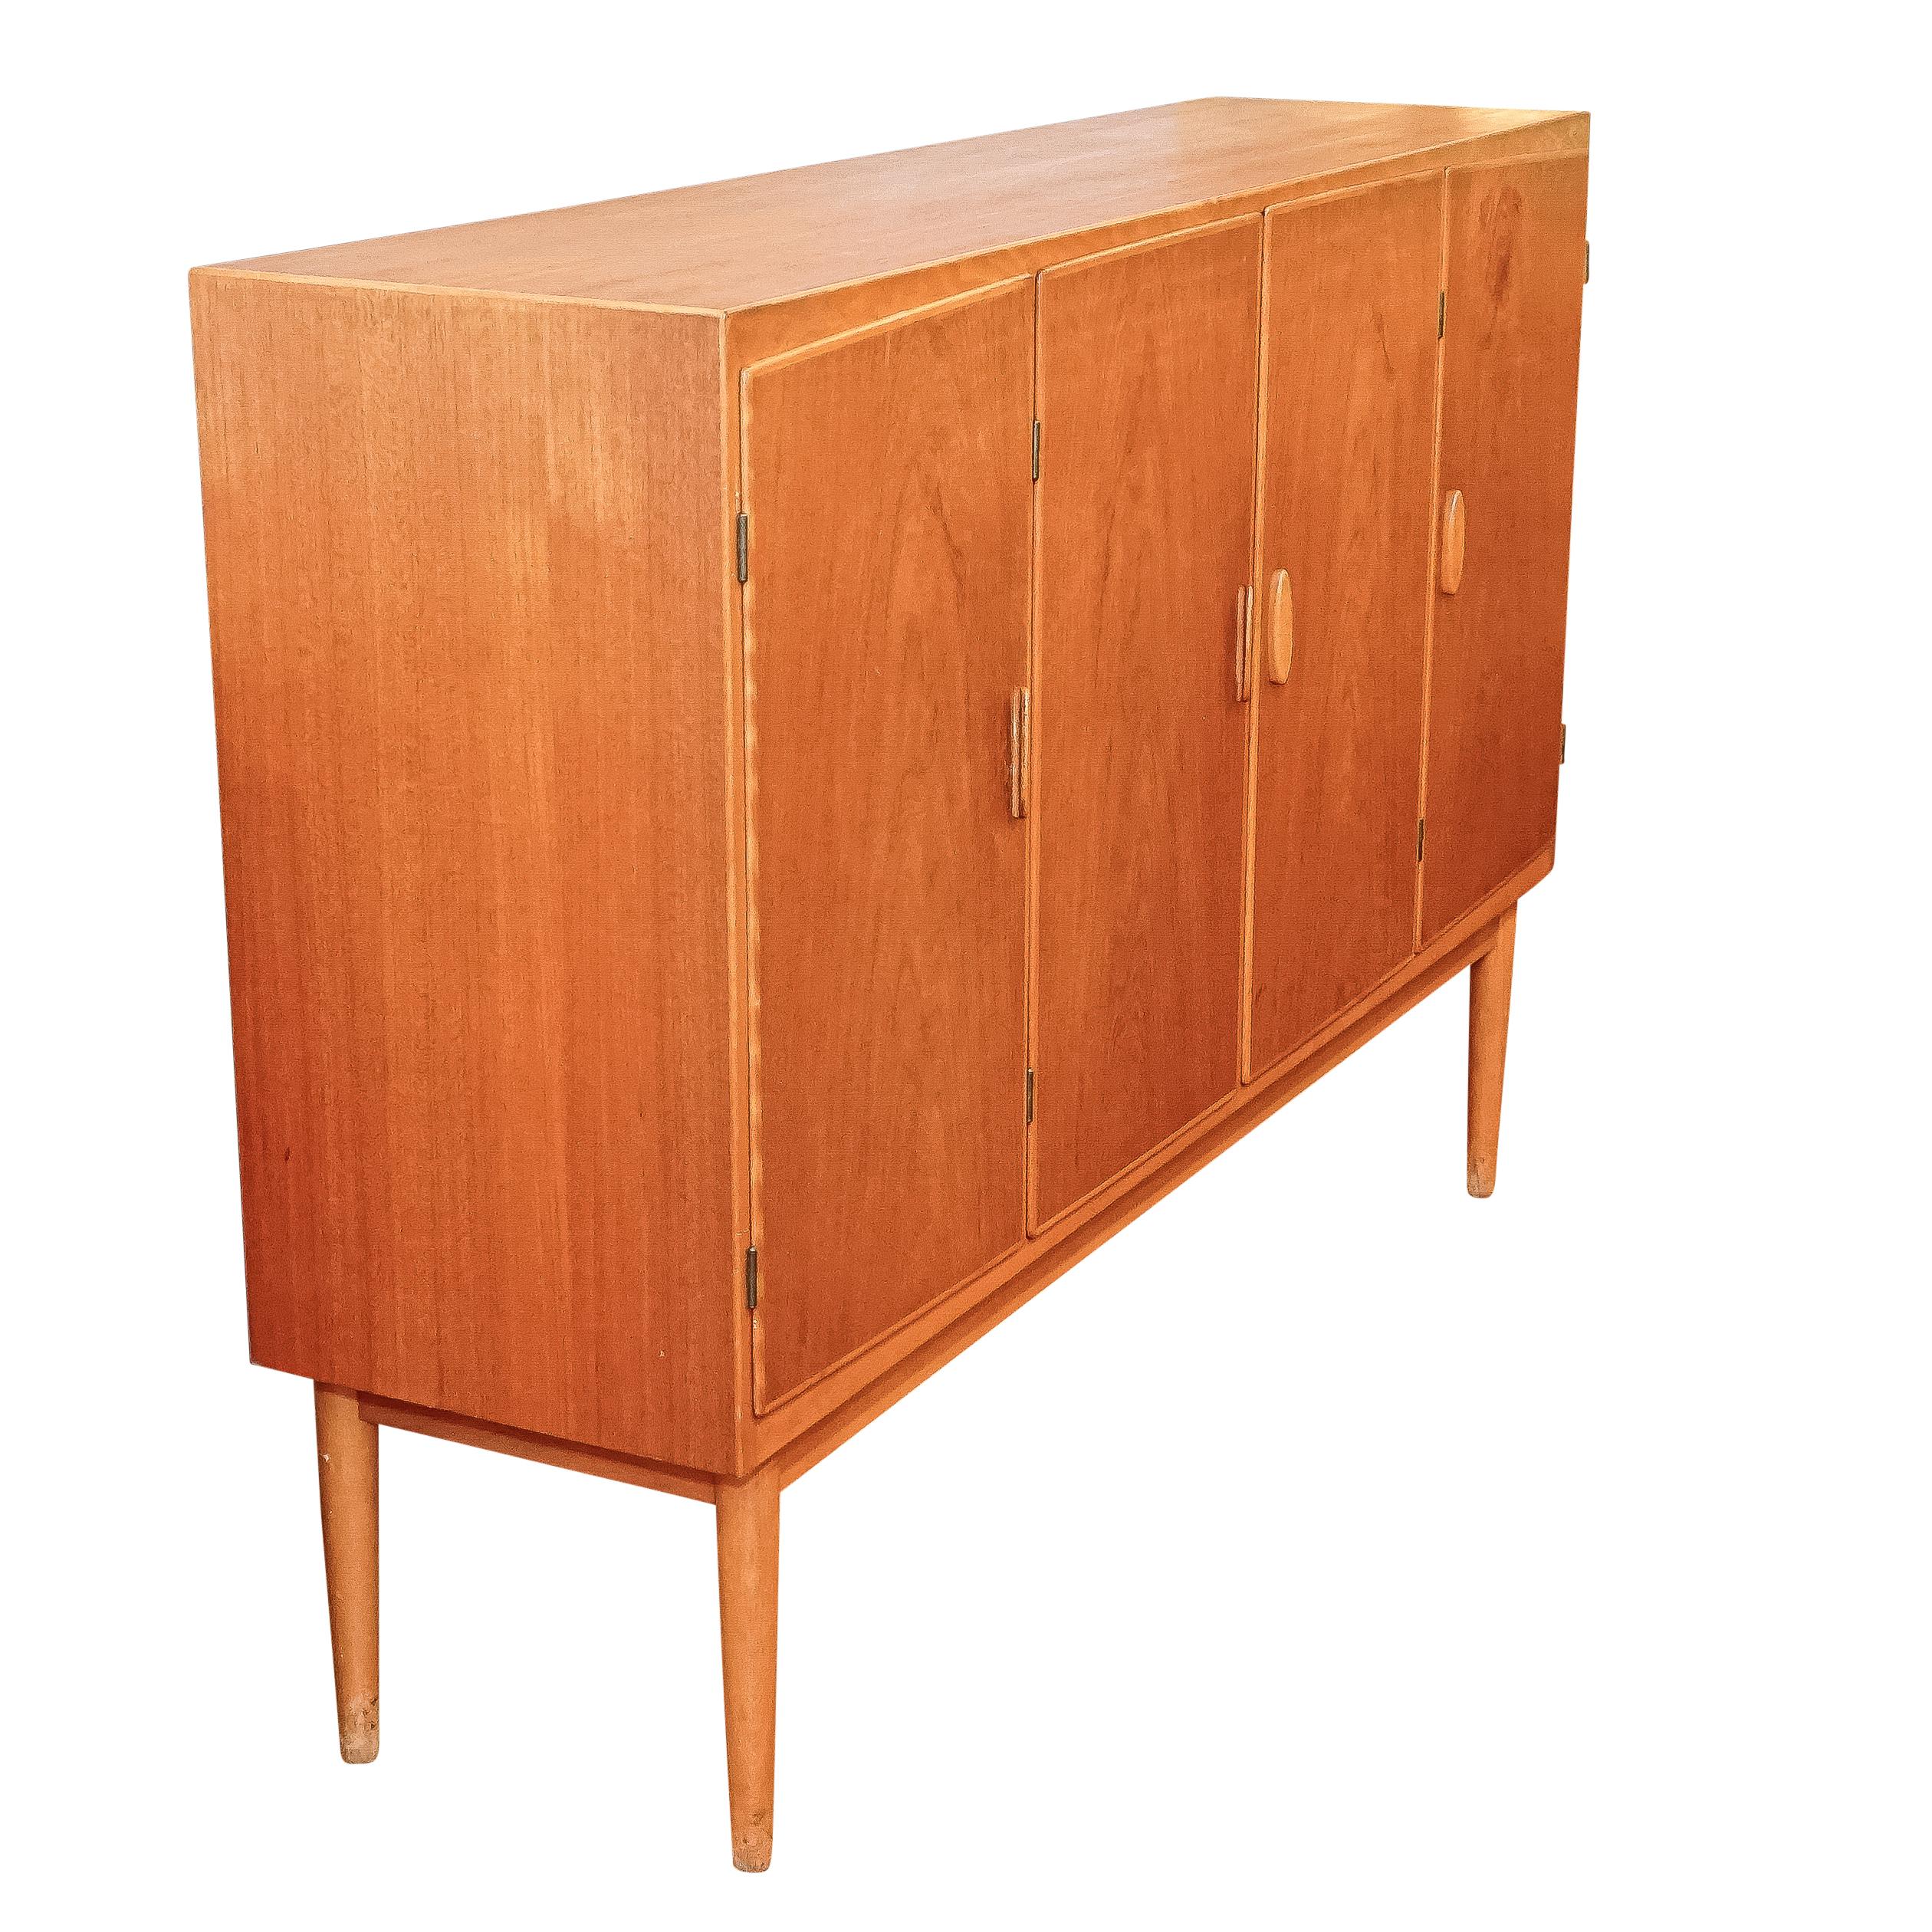 Danish Modern Sideboard, Denmark, 1950 In Good Condition For Sale In New York, NY